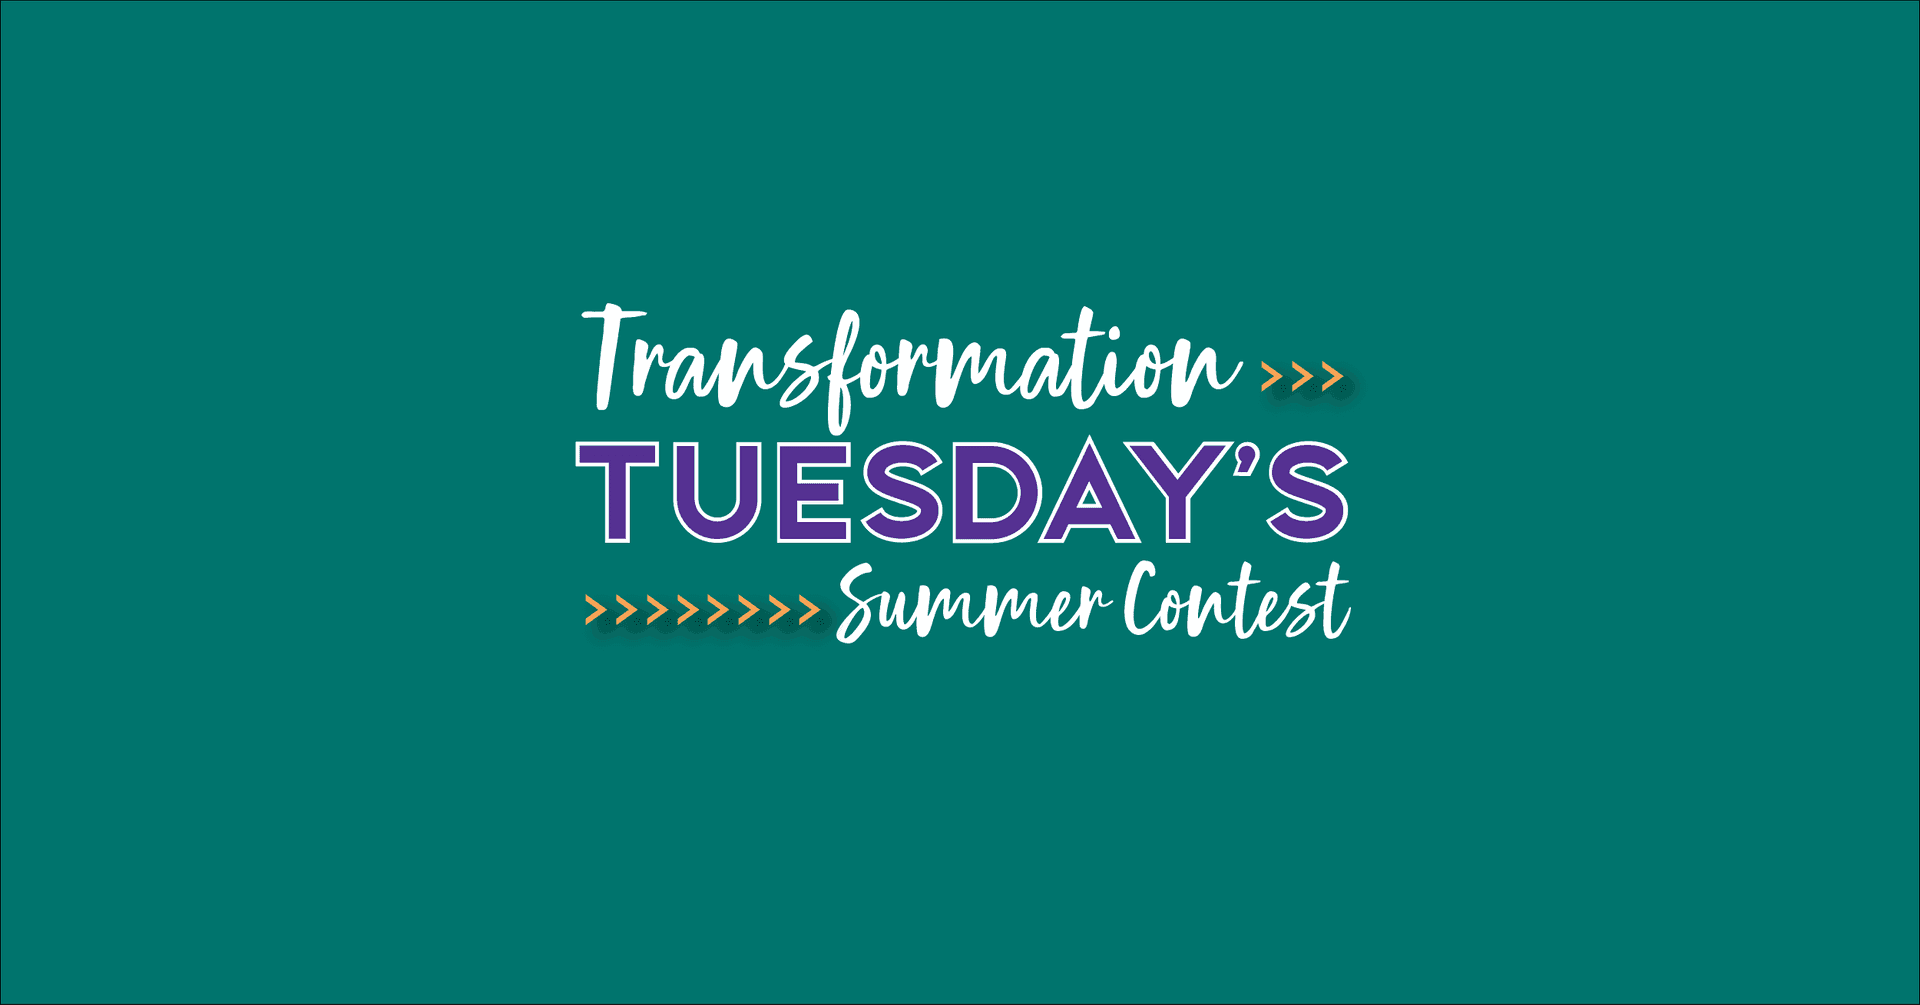 Wording on green background that says Transformation Tuesday's Summer contest